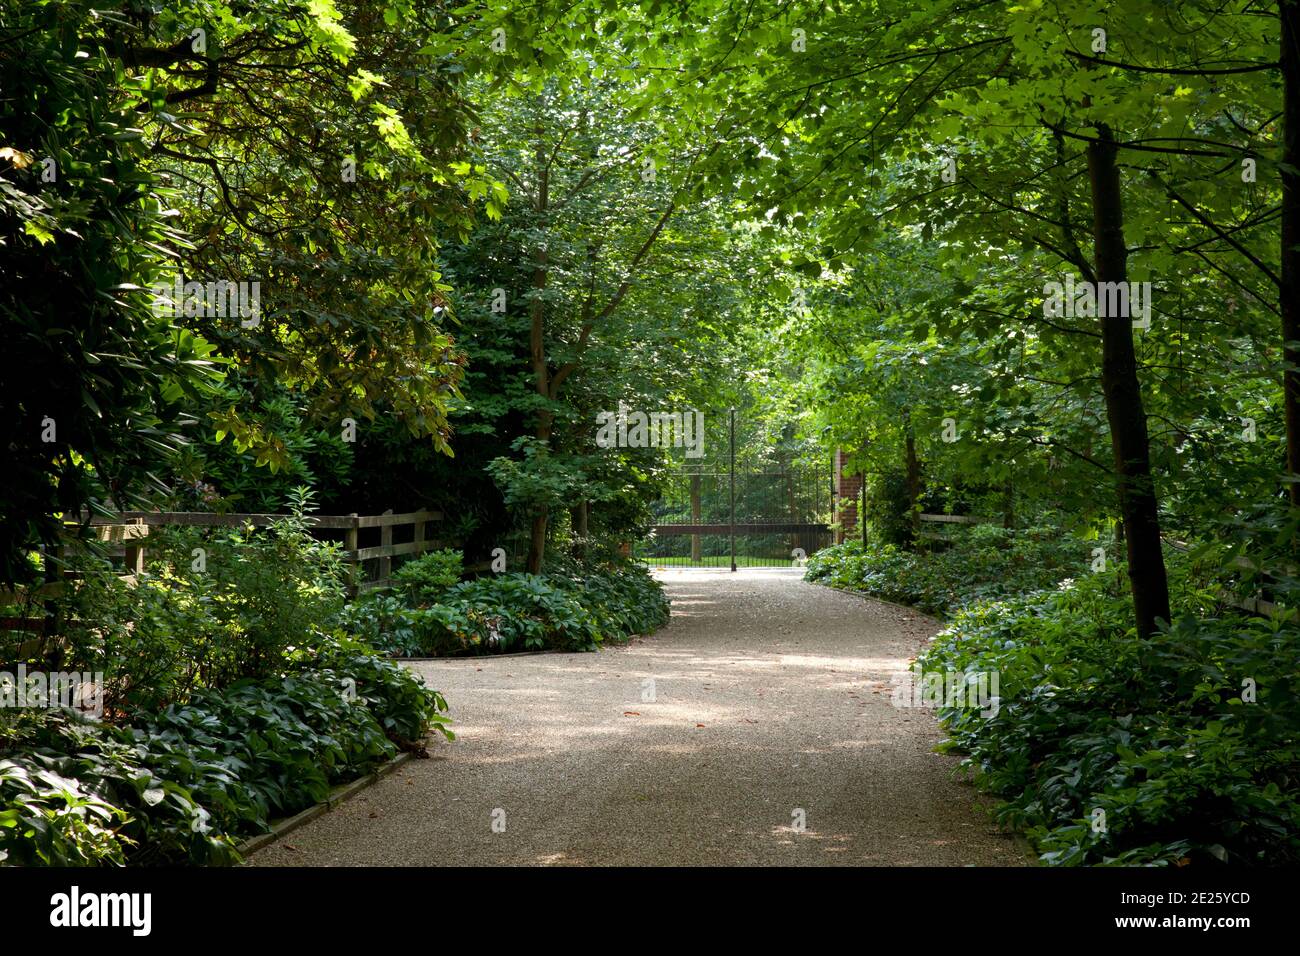 View through trees down formal gravel driveway to closed iron gates at end Stock Photo